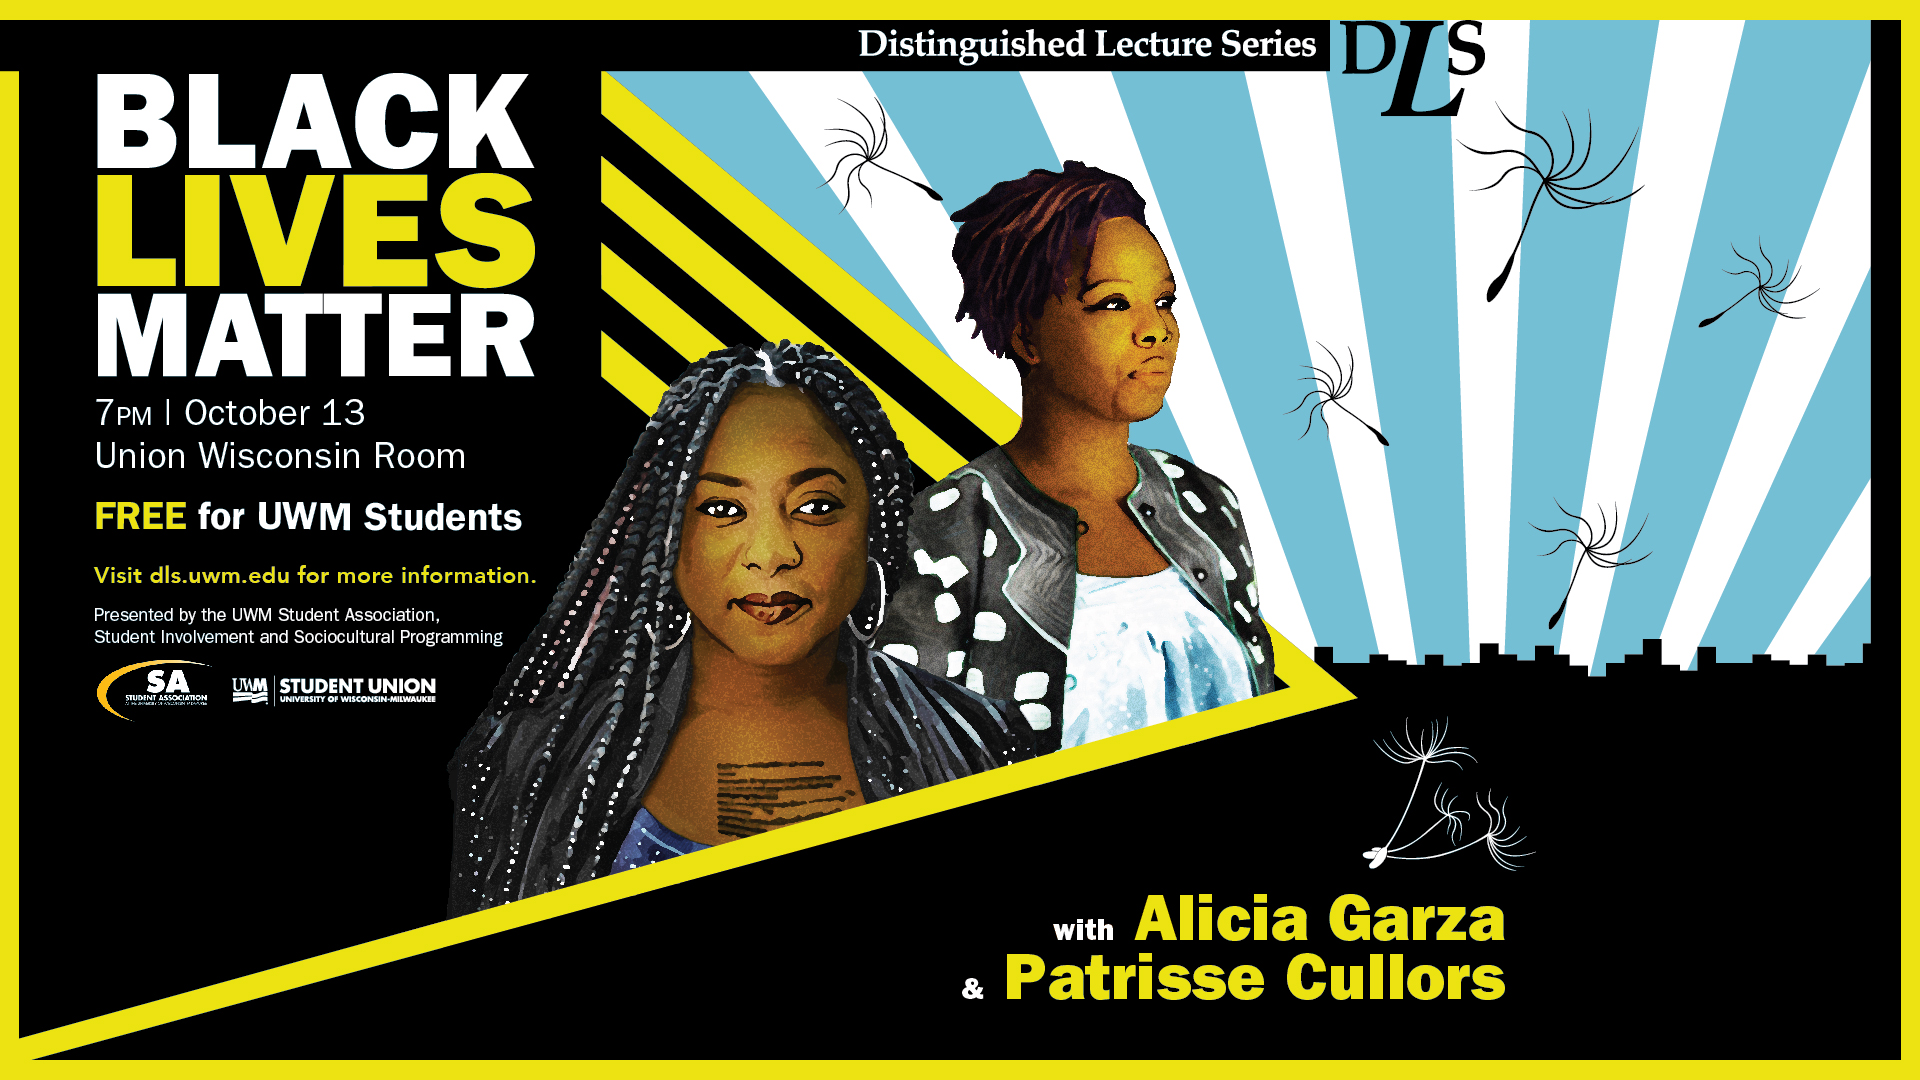 The Distinguished Lecture Series Presents Black Lives Matter Alicia Garza And Patrisse Cullors